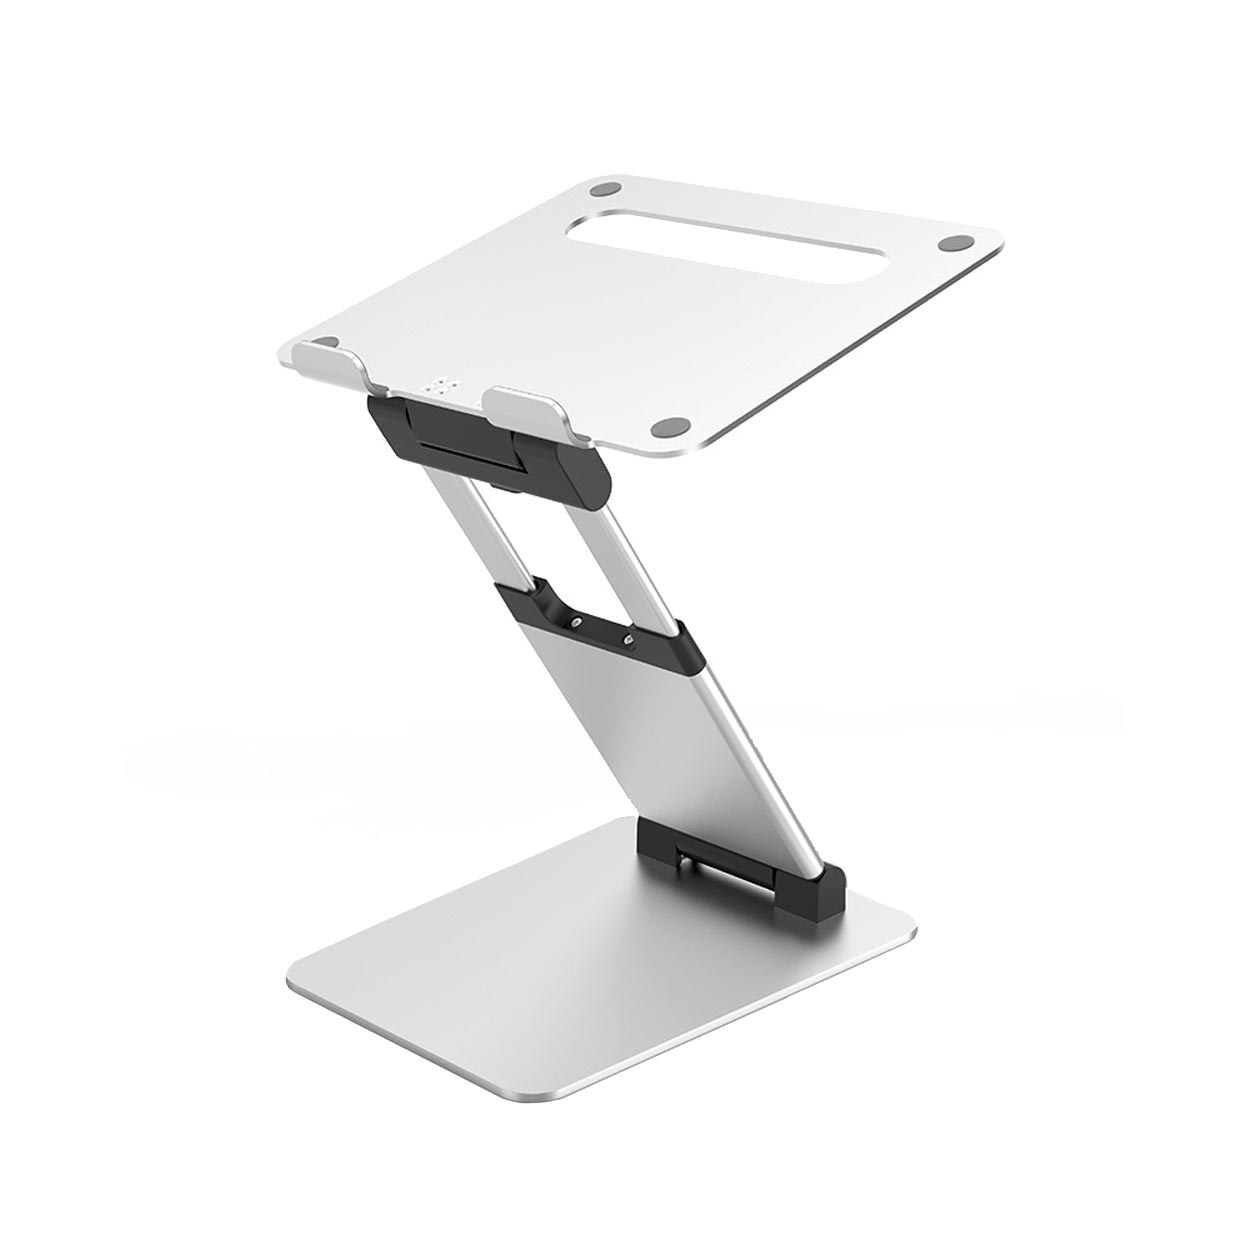 Ergonomic Laptop Stand with Adjustable Height